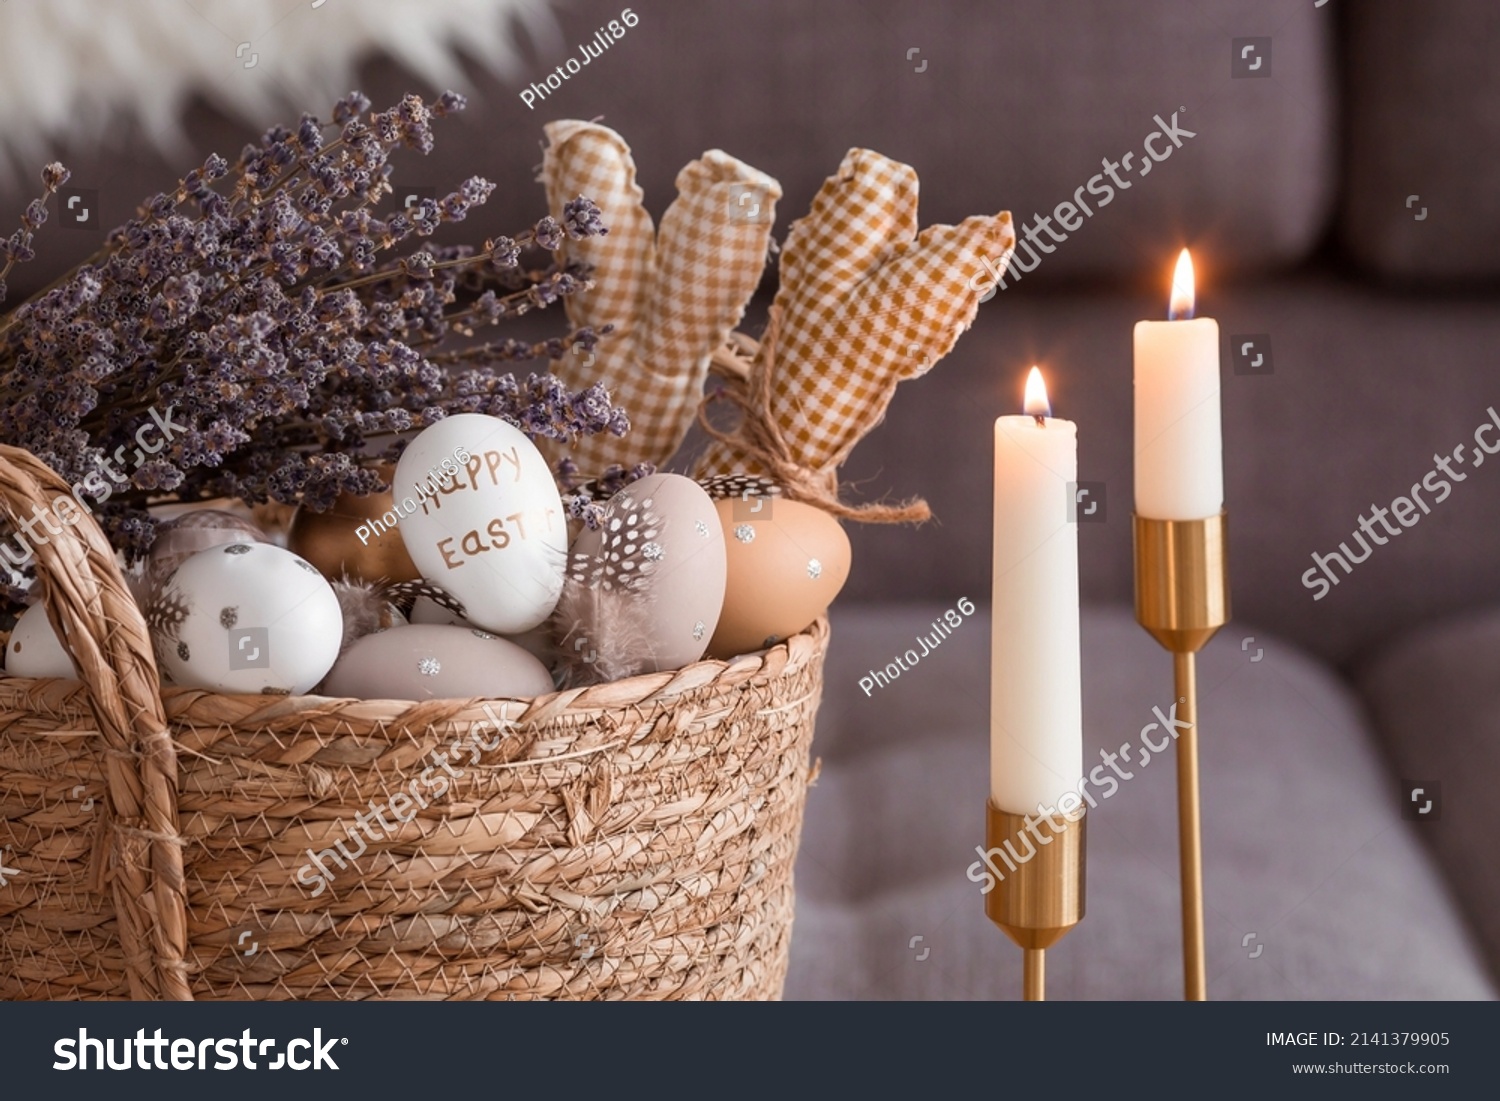 Provence. A wicker basket with Easter eggs, lavender and burning candles in the interior of the living room on a wooden table. The concept of home comfort in the bright holiday of Easter 2022. #2141379905